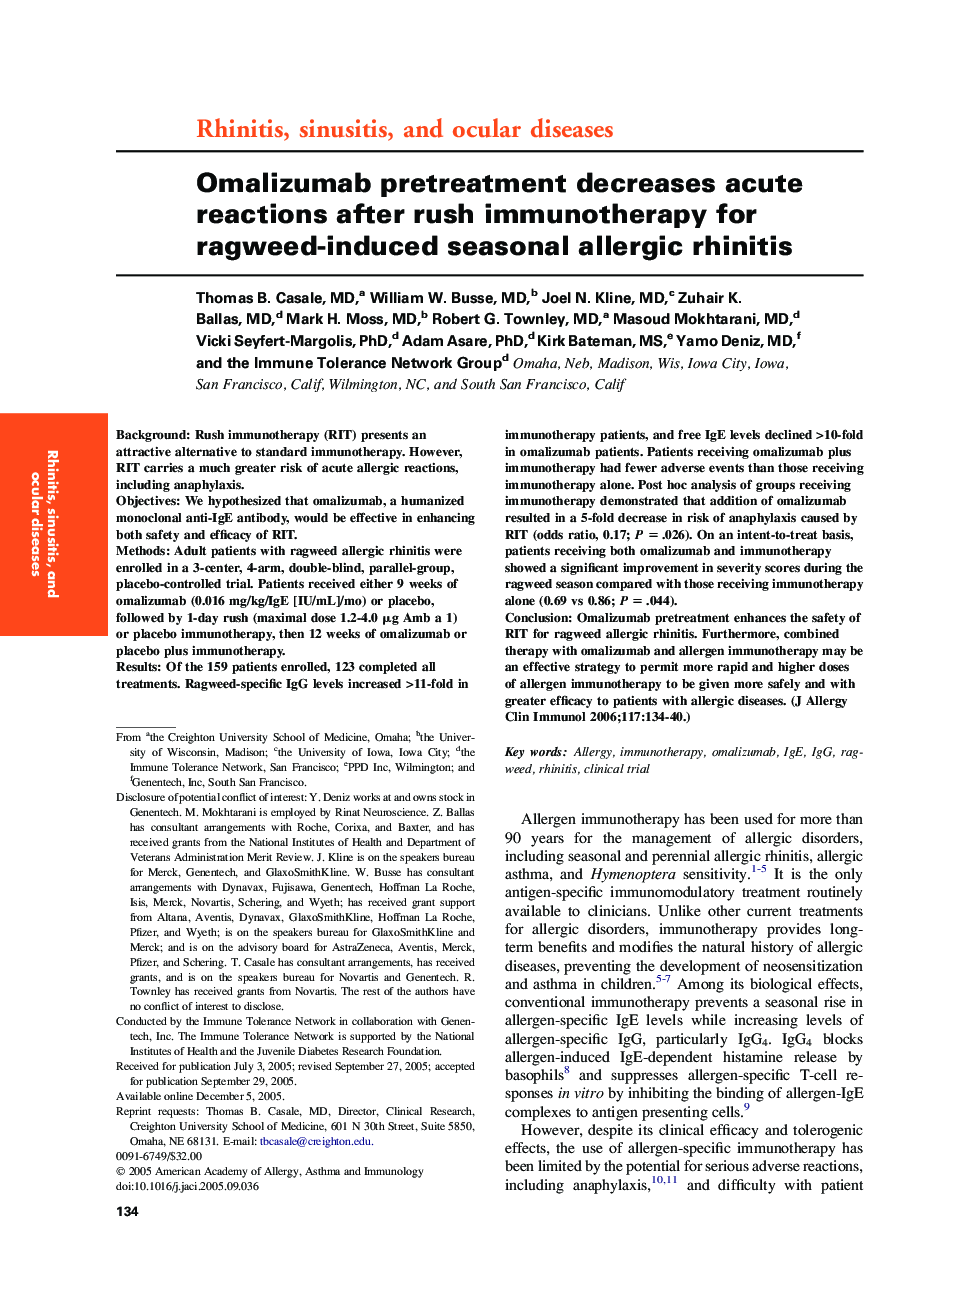 Omalizumab pretreatment decreases acute reactions after rush immunotherapy for ragweed-induced seasonal allergic rhinitis 